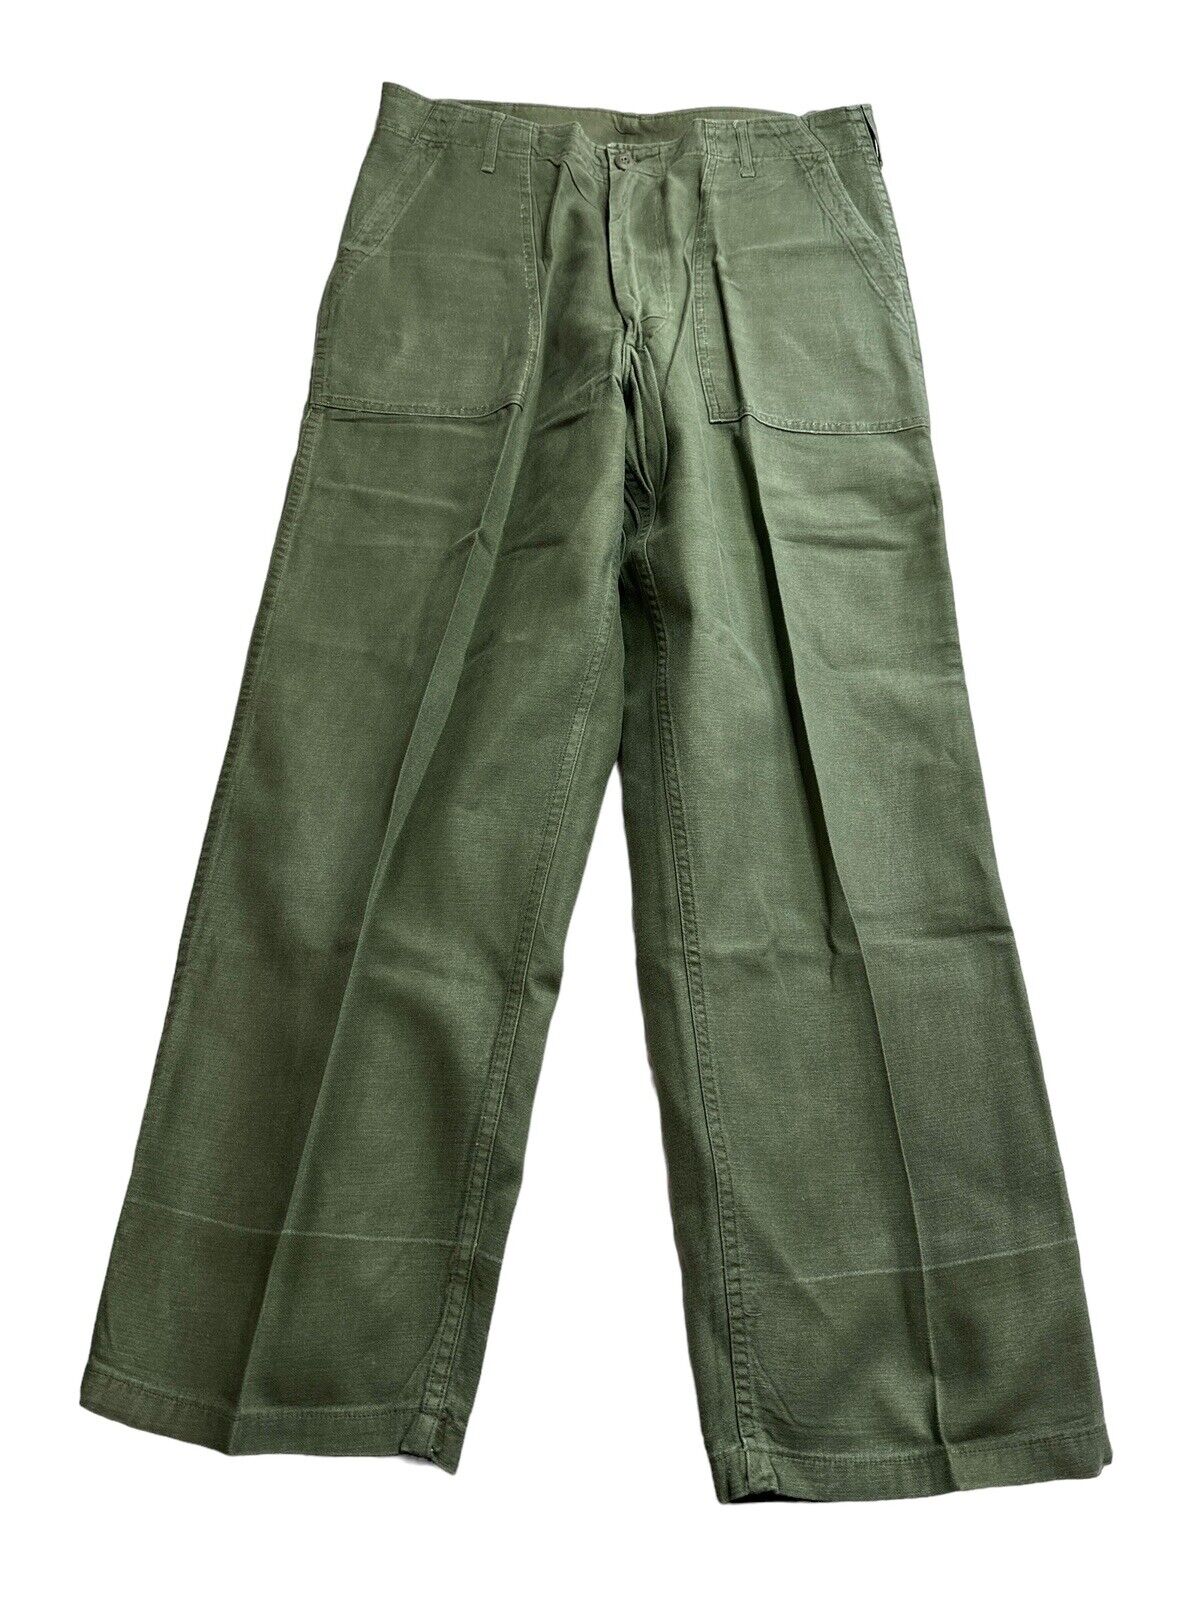 Vintage US Army Pants Trousers Men\'s Sateen OG 107 Type I 34x30 Army Green 60\'s